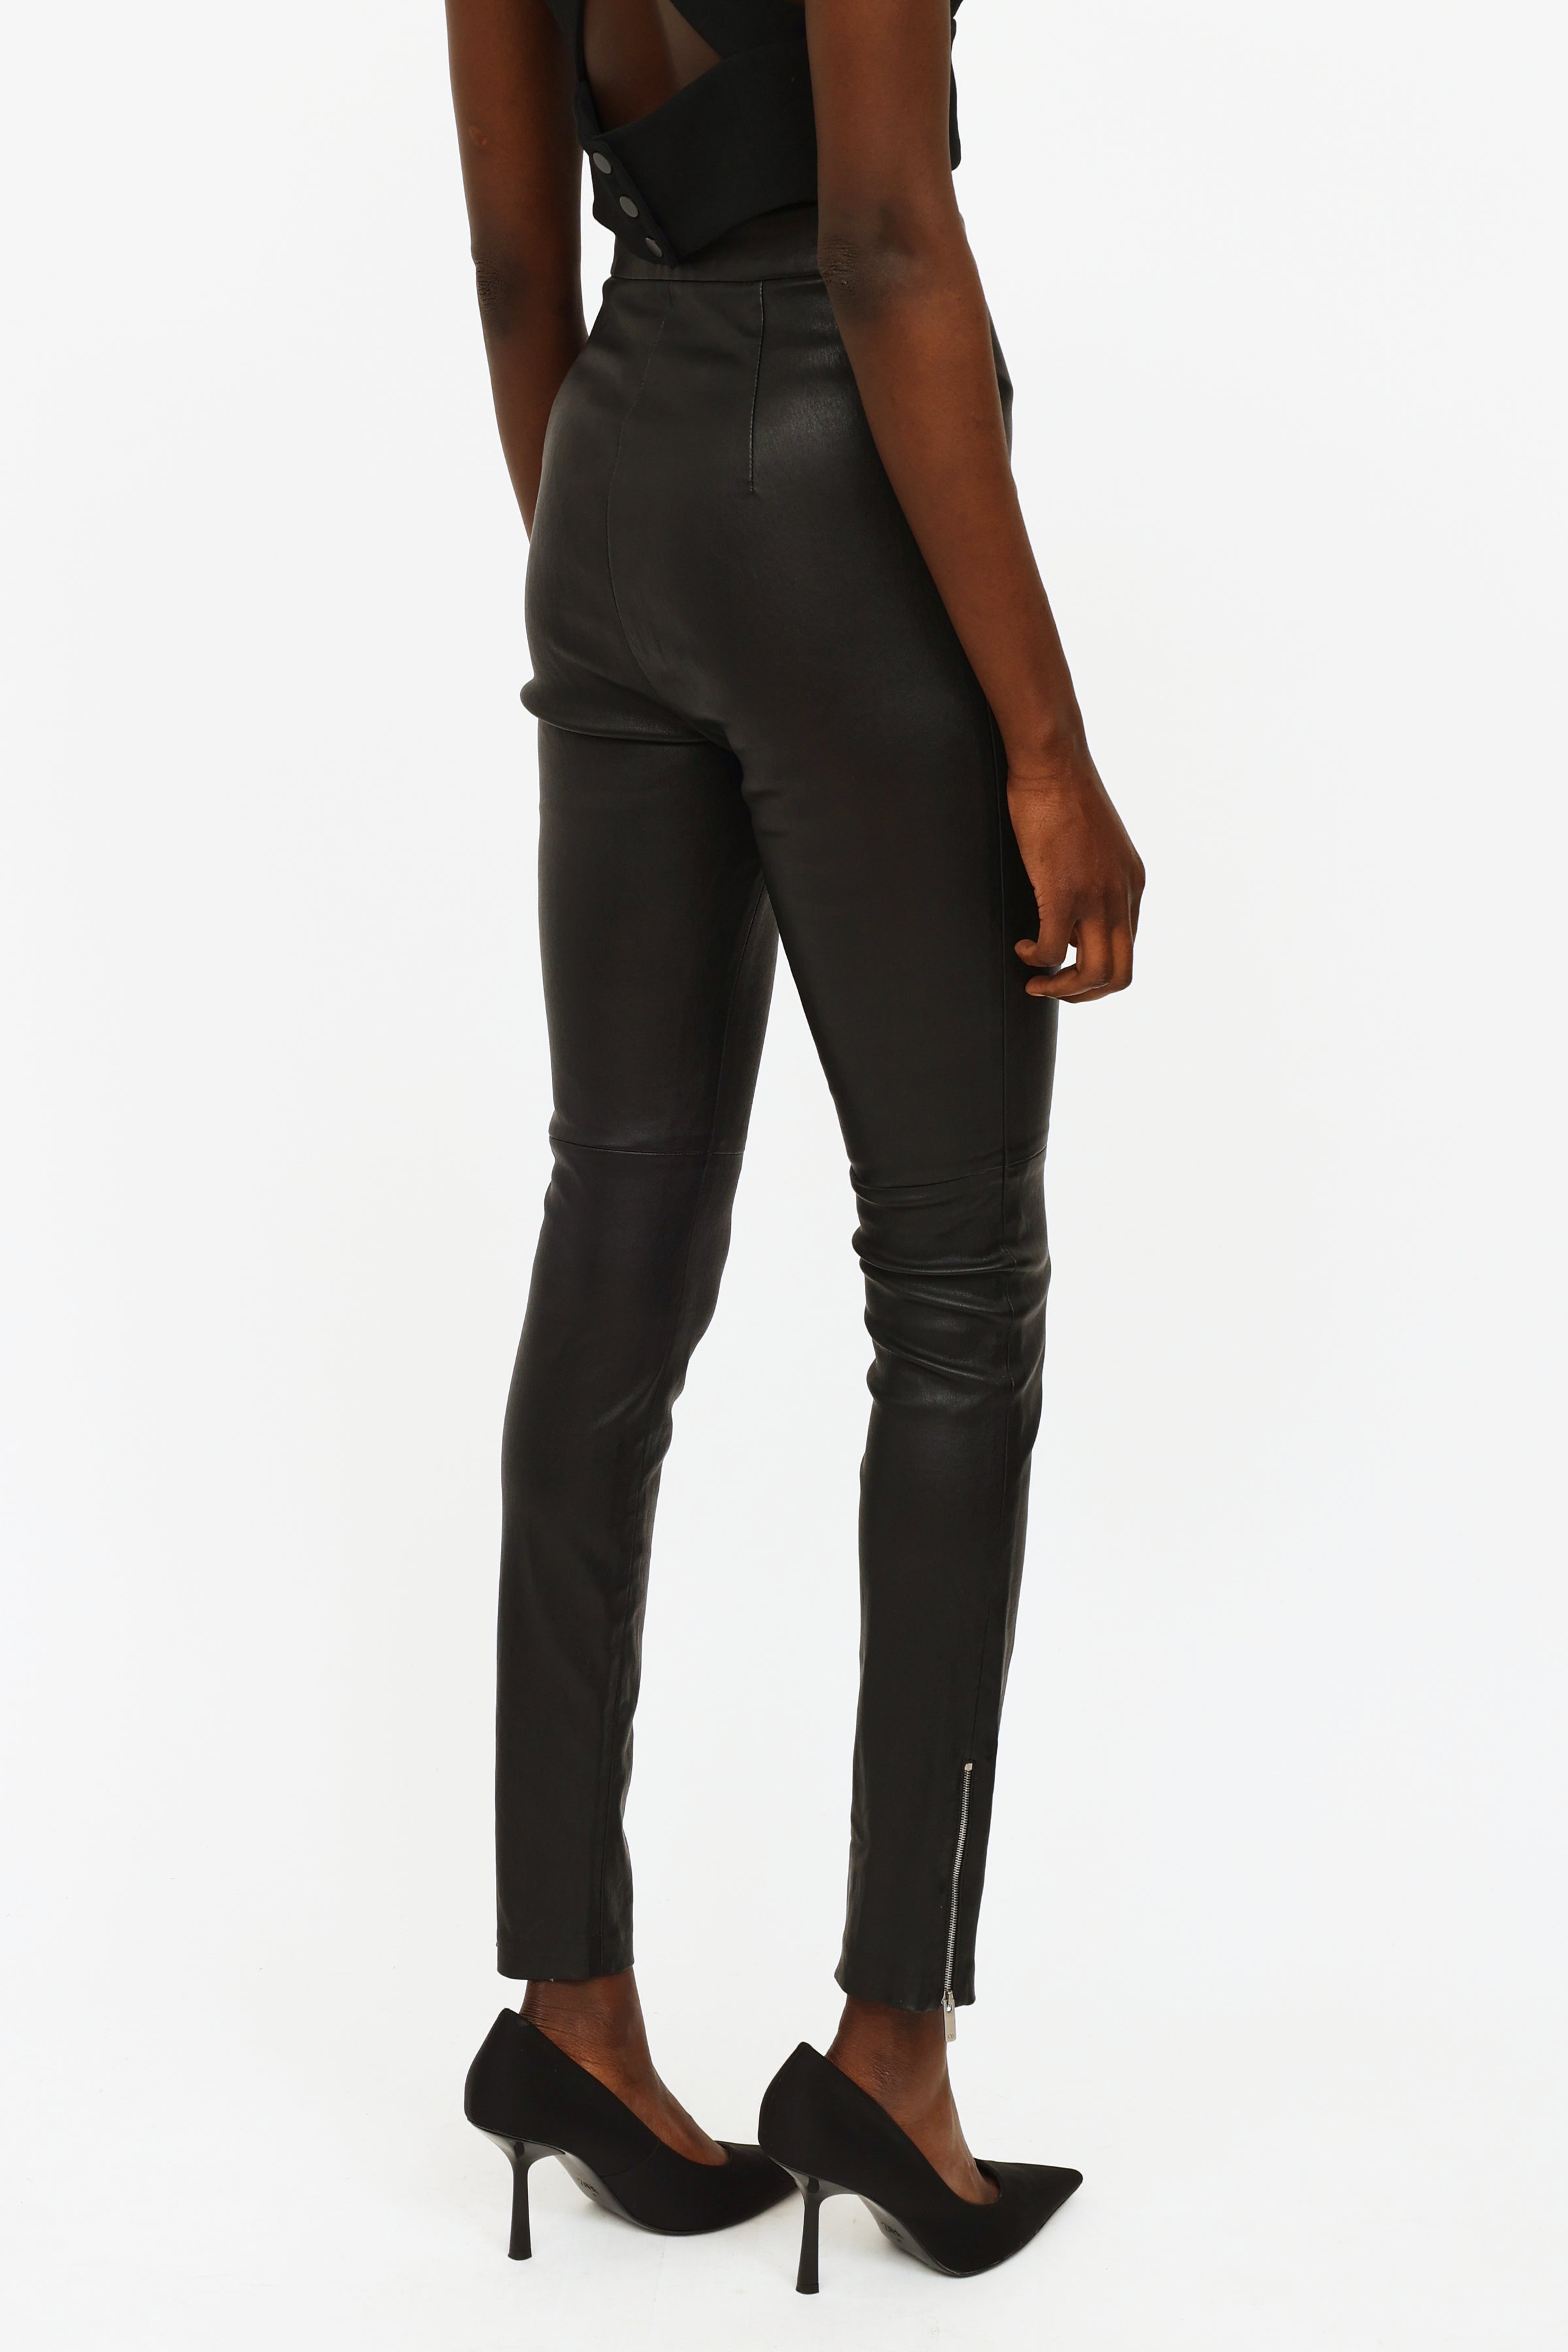 Dior // Black Leather Skinny Pants – VSP Consignment